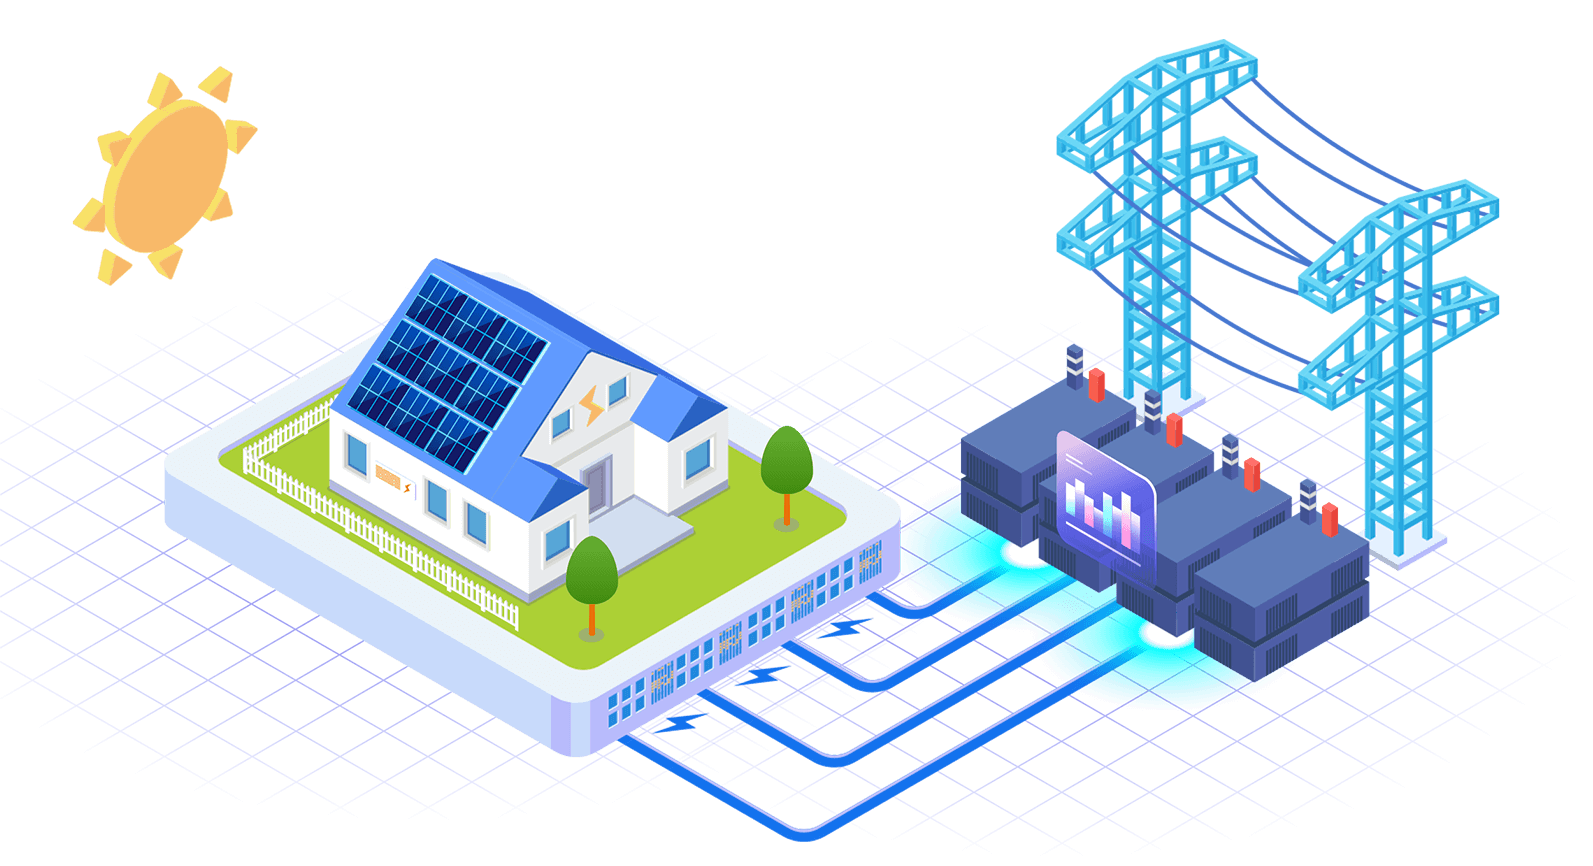 Cartoon image of solar panels and the grid